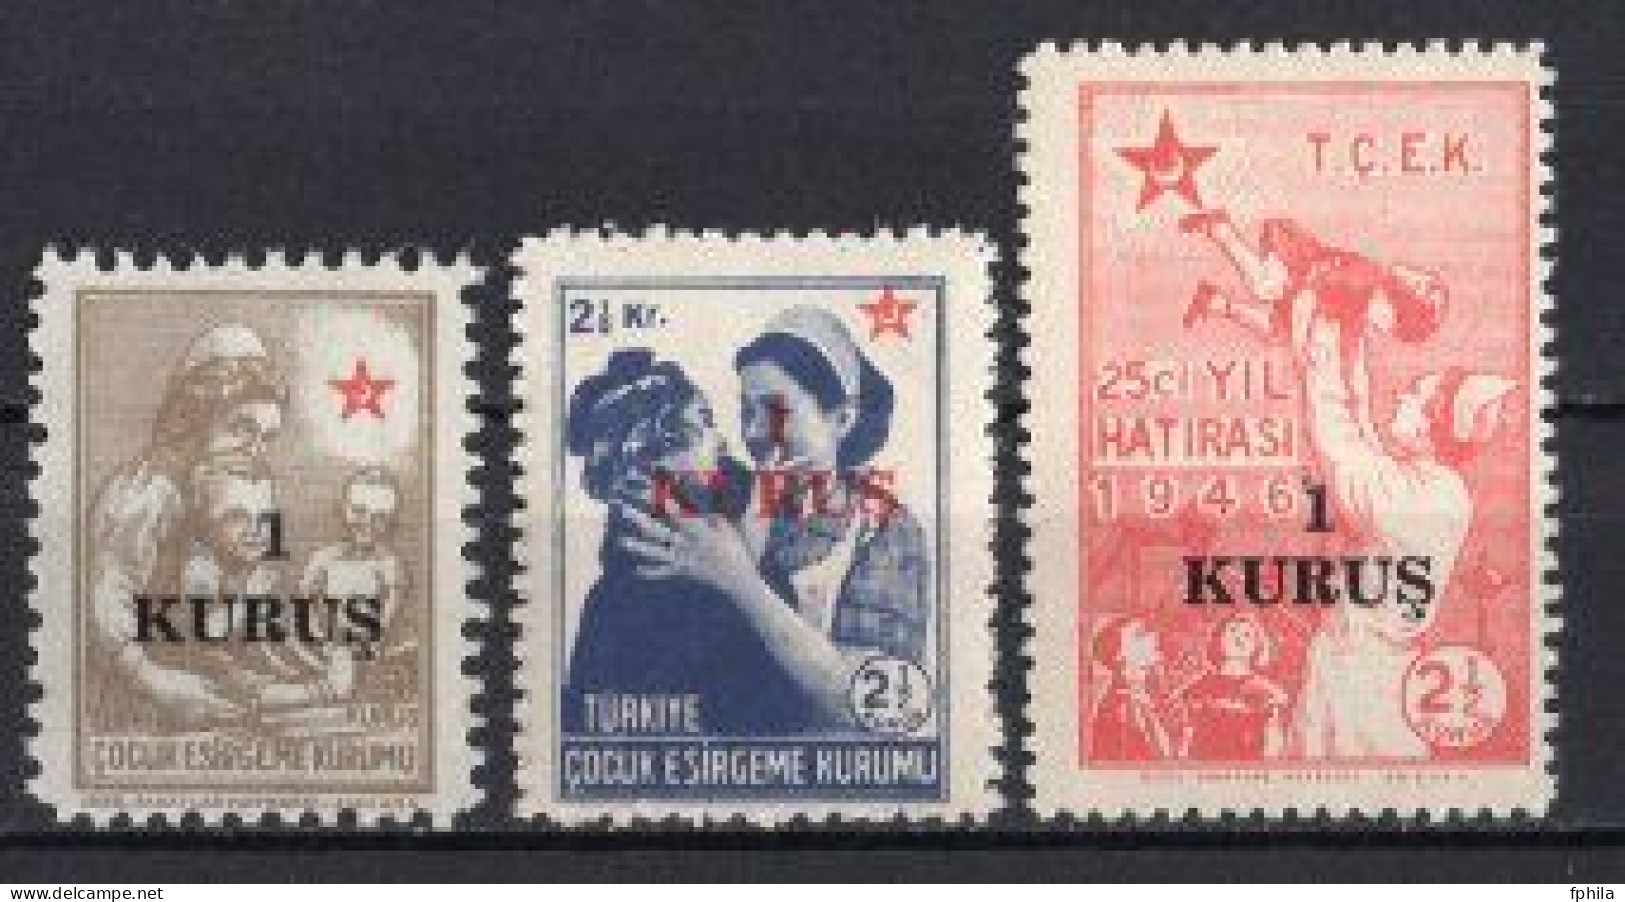 1952 TURKEY SMALL 1 KURUS SURCHARGED TURKISH SOCIETY FOR THE PROTECTION OF CHILDREN STAMPS MNH ** - Timbres De Bienfaisance